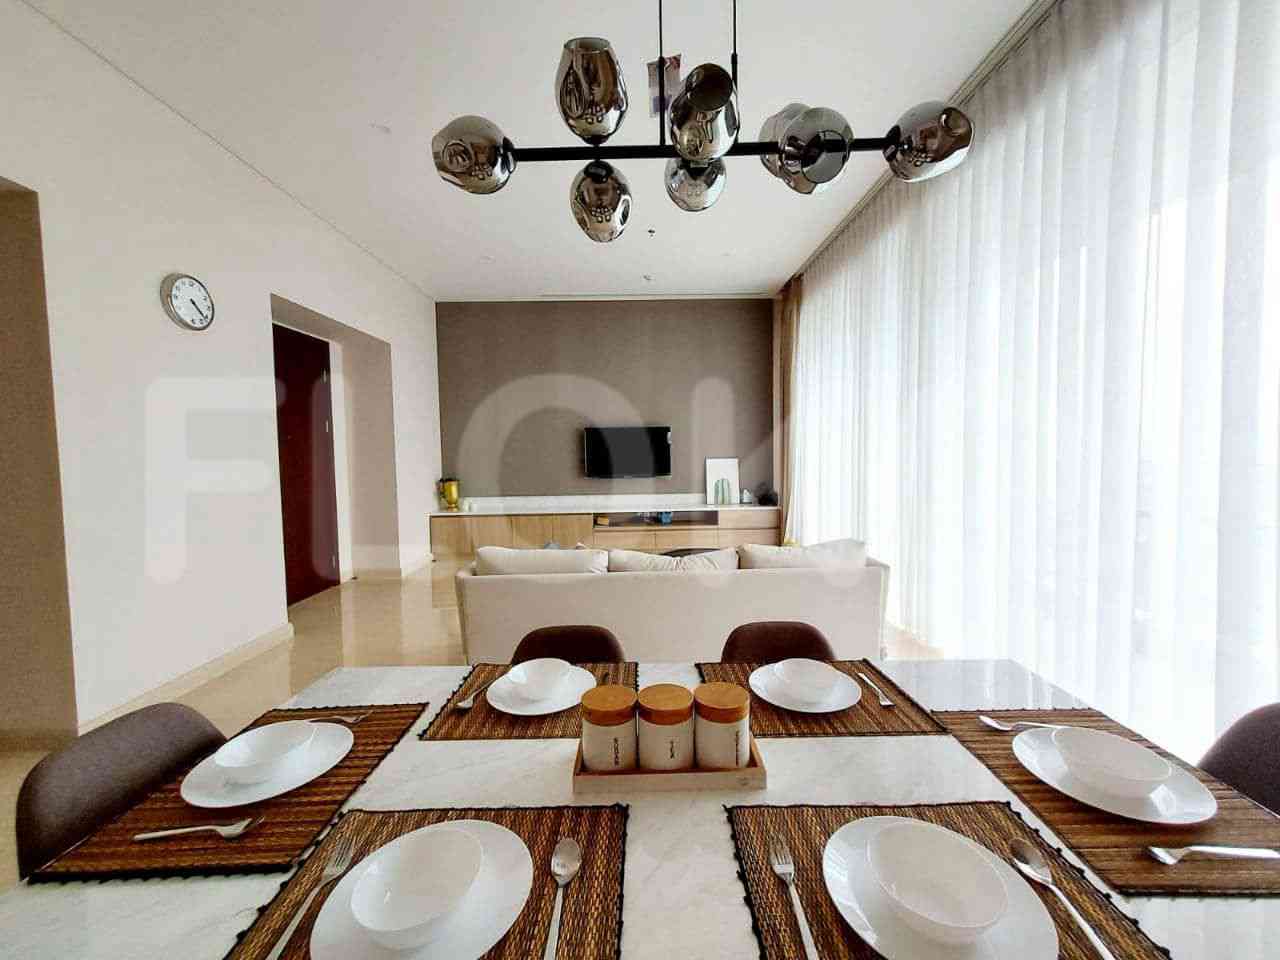 2 Bedroom on 38th Floor for Rent in Pakubuwono Spring Apartment - fgaf4e 3